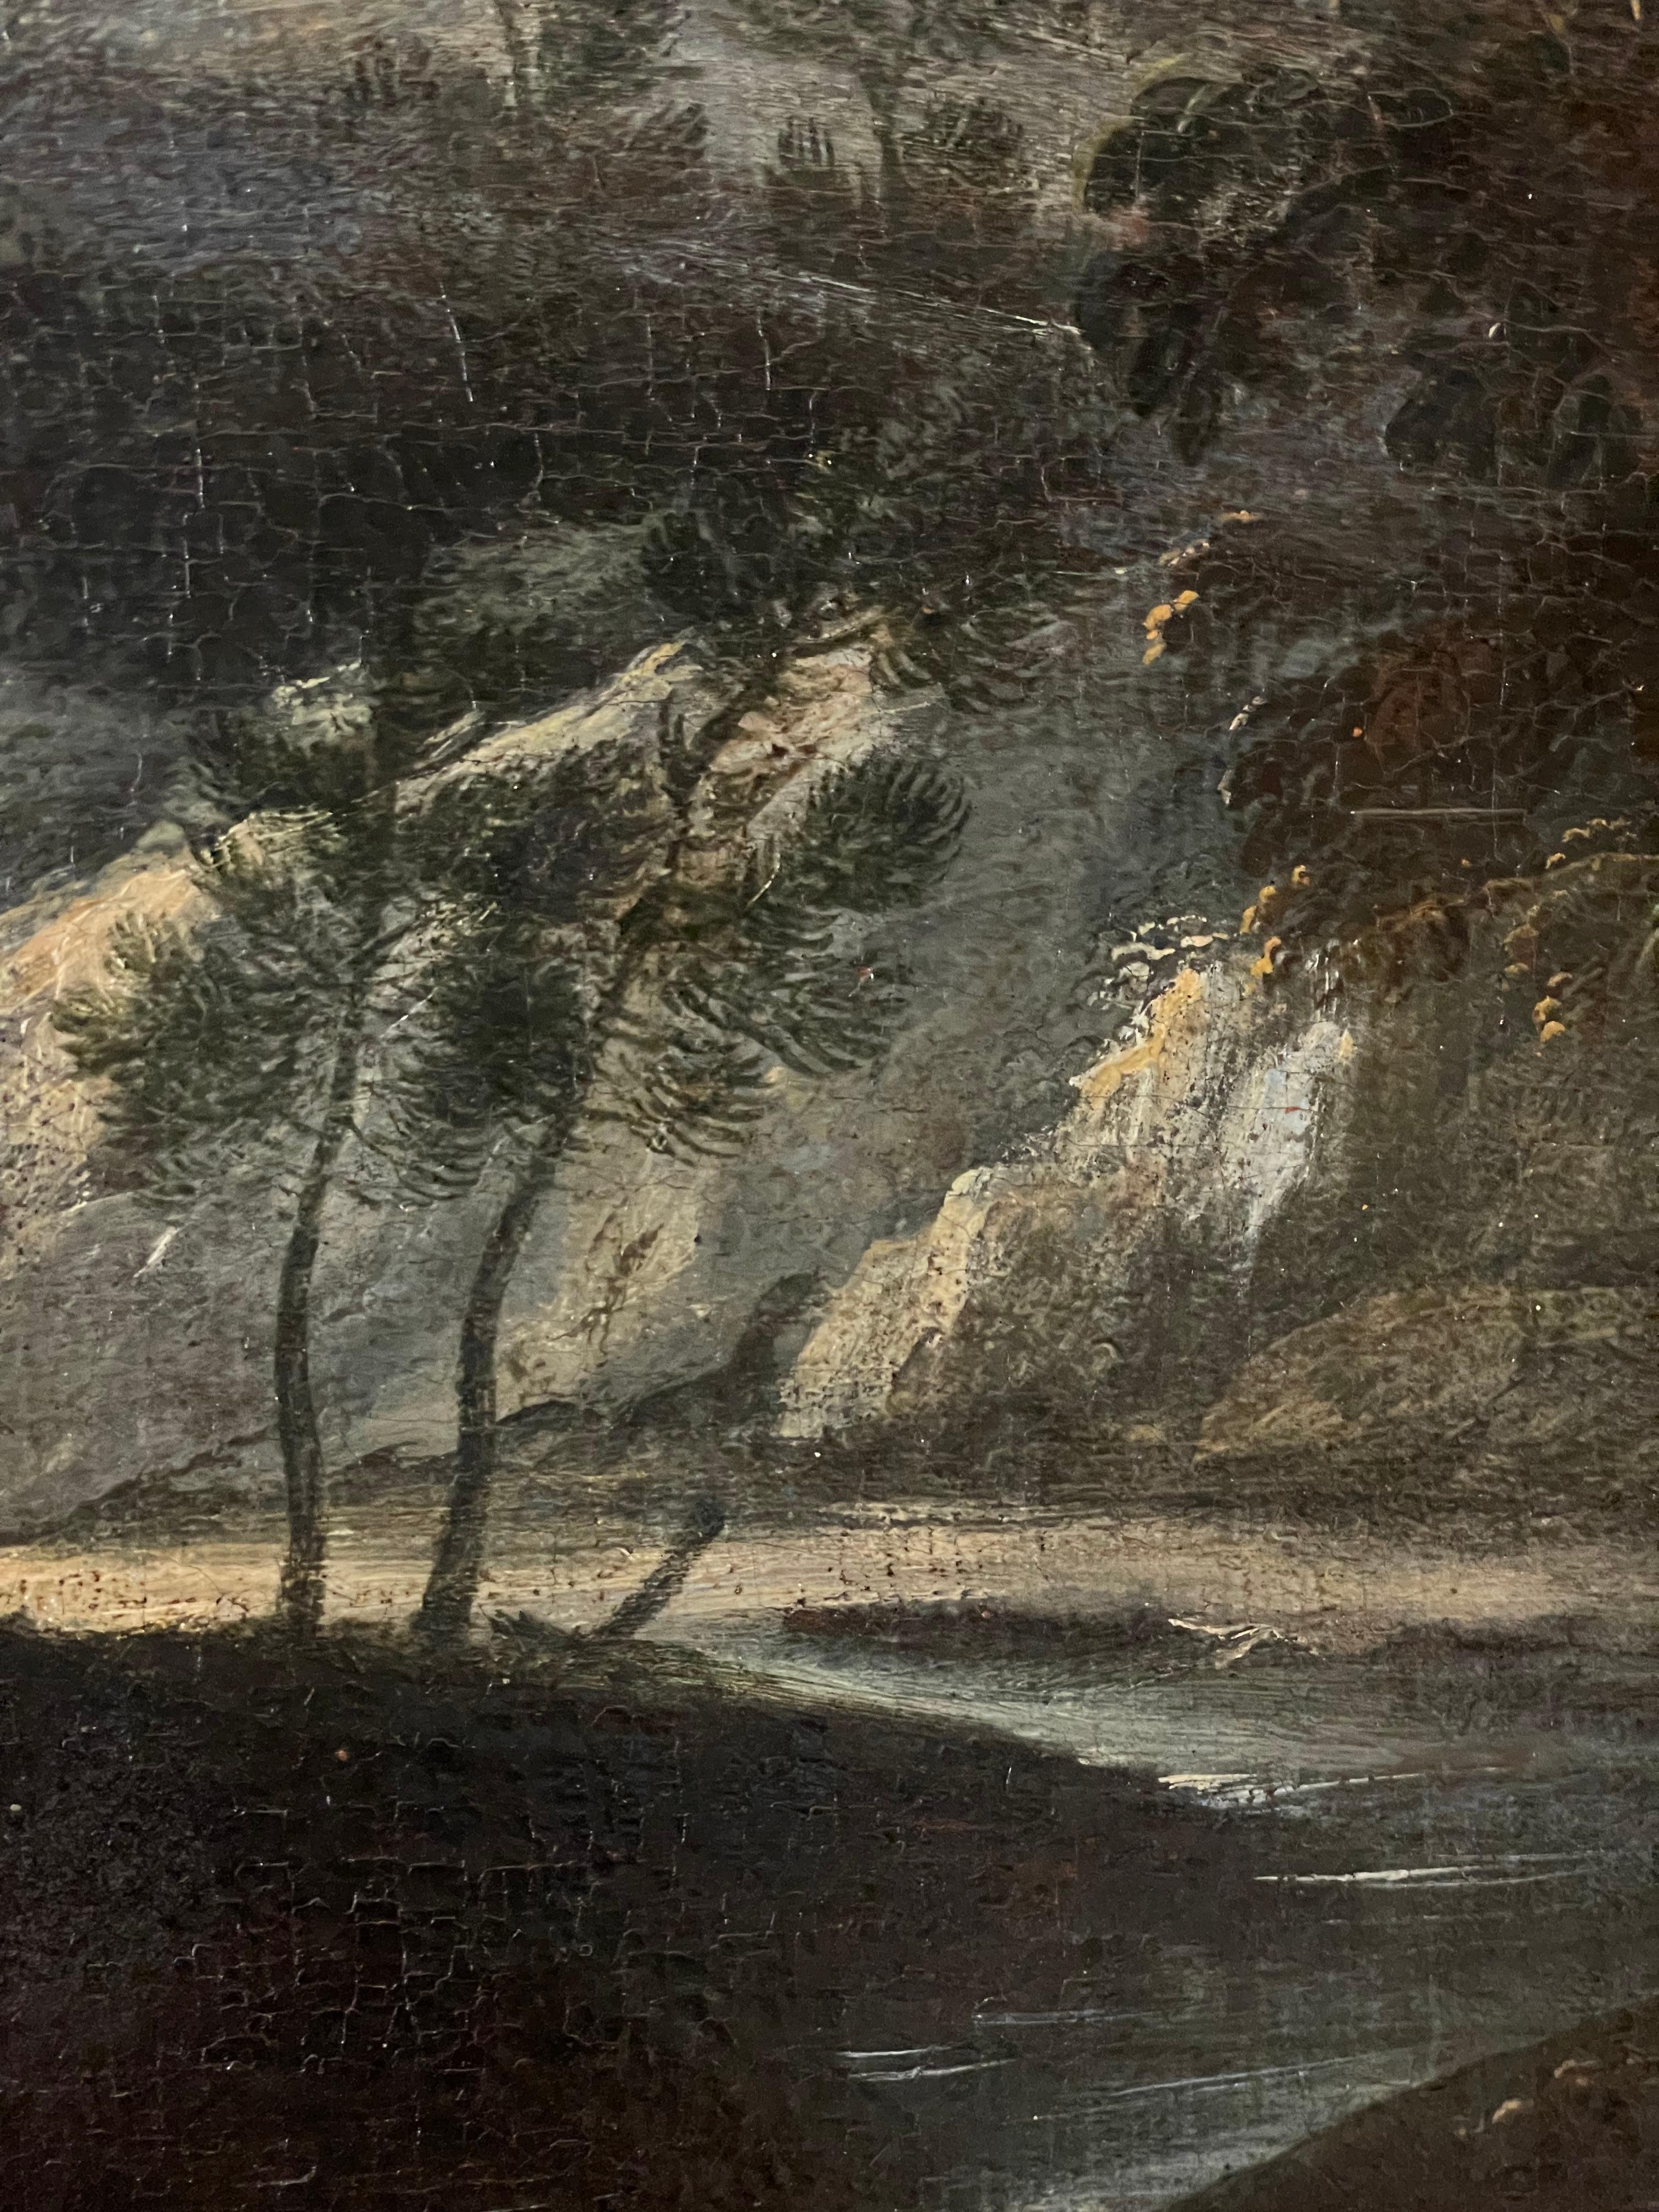 Figures in Classical Landscape
Italian School, 17th century
circle of Salvator Rosa (Italian 1615-1673)
oil painting on canvas: 34 x 58 inches
framed: 38 x 62 inches
condition: relined, restored to a high standard, very presentable condition, as is